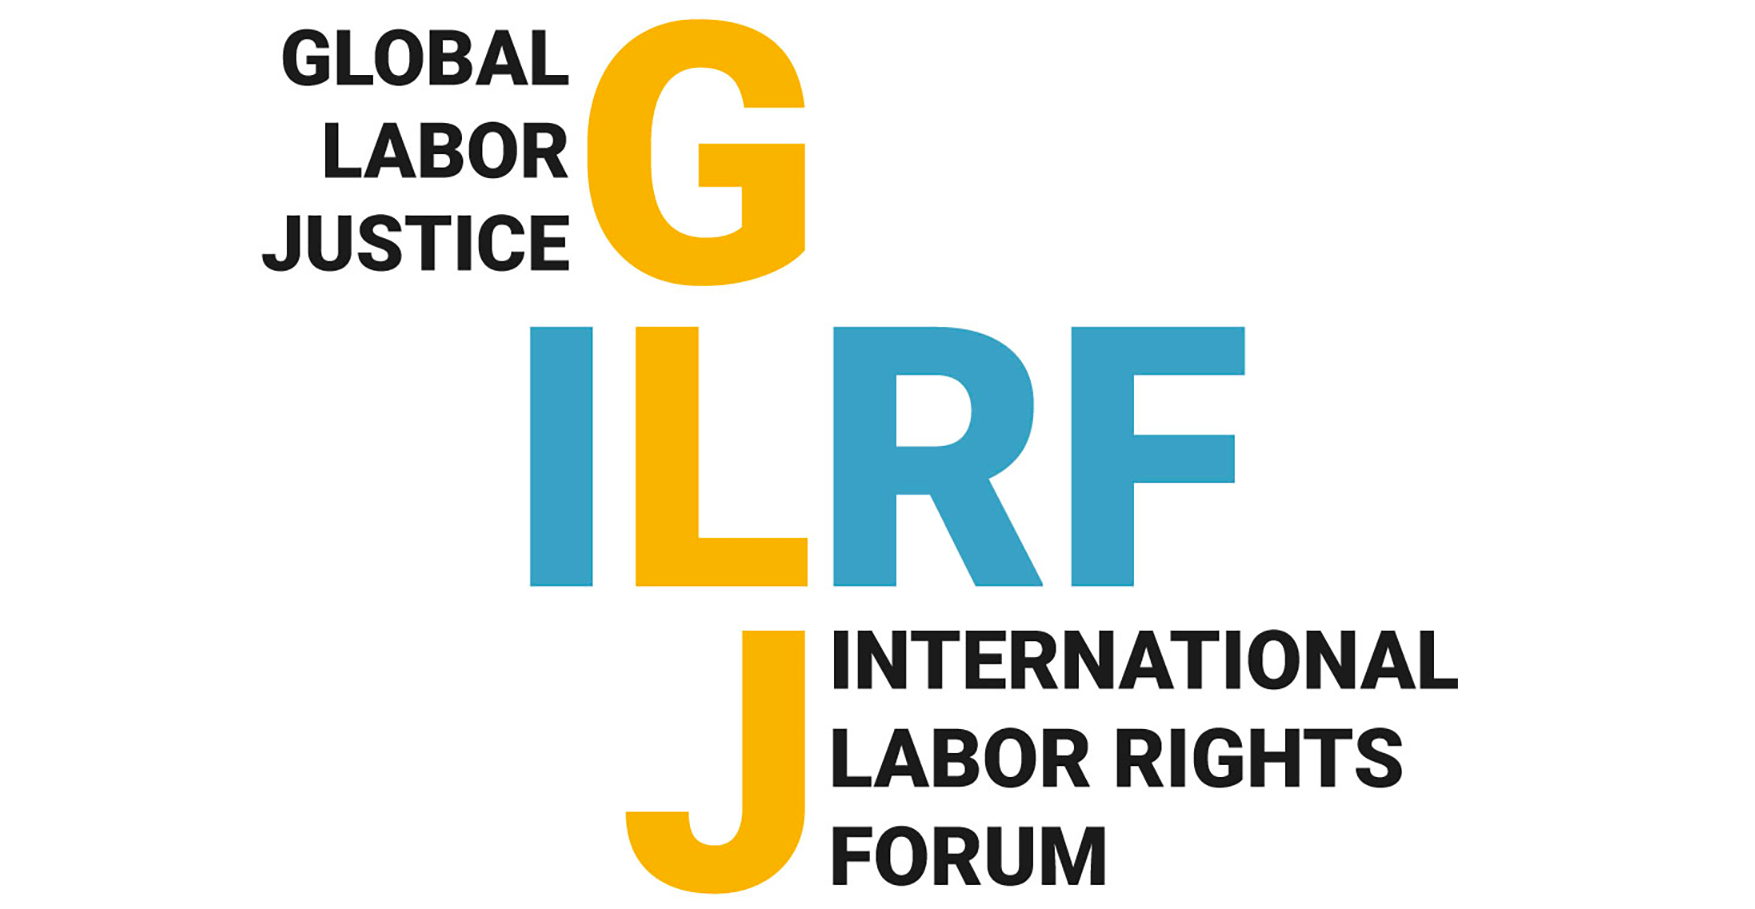 Global Labor Justice-International Labor Rights Forum